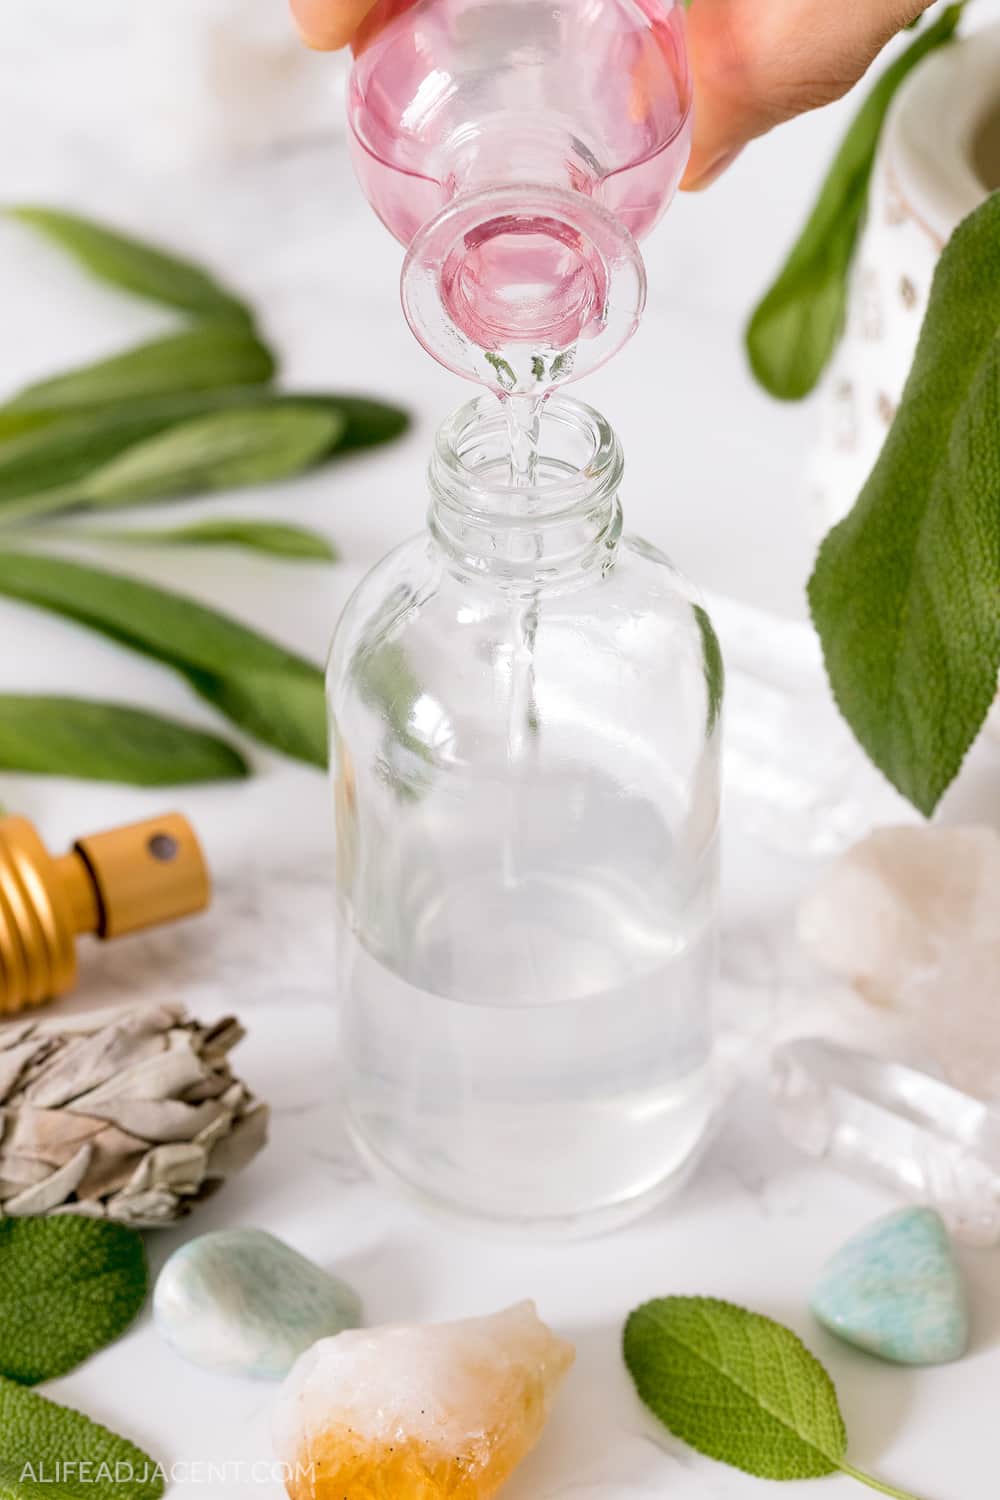 How to make smudge spray recipe – pouring sage essential oil into spray bottle.